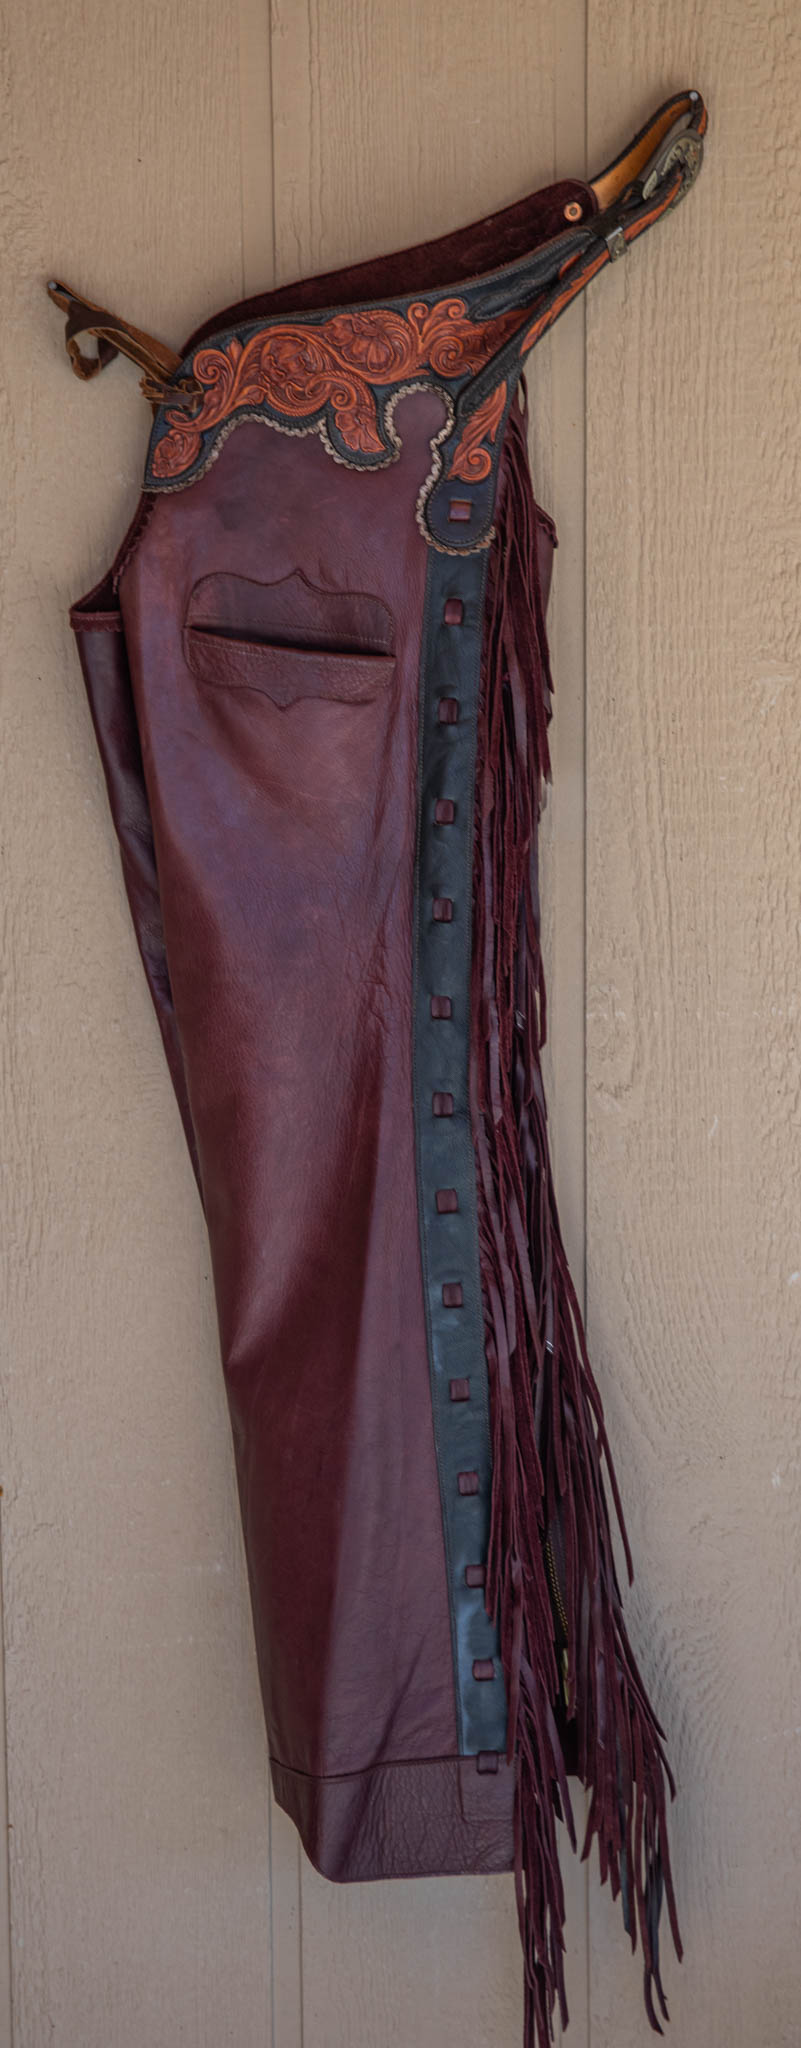 Burgundy Smooth-out Chaps w/ Black & Mahogany Floral Yokes and Pocket